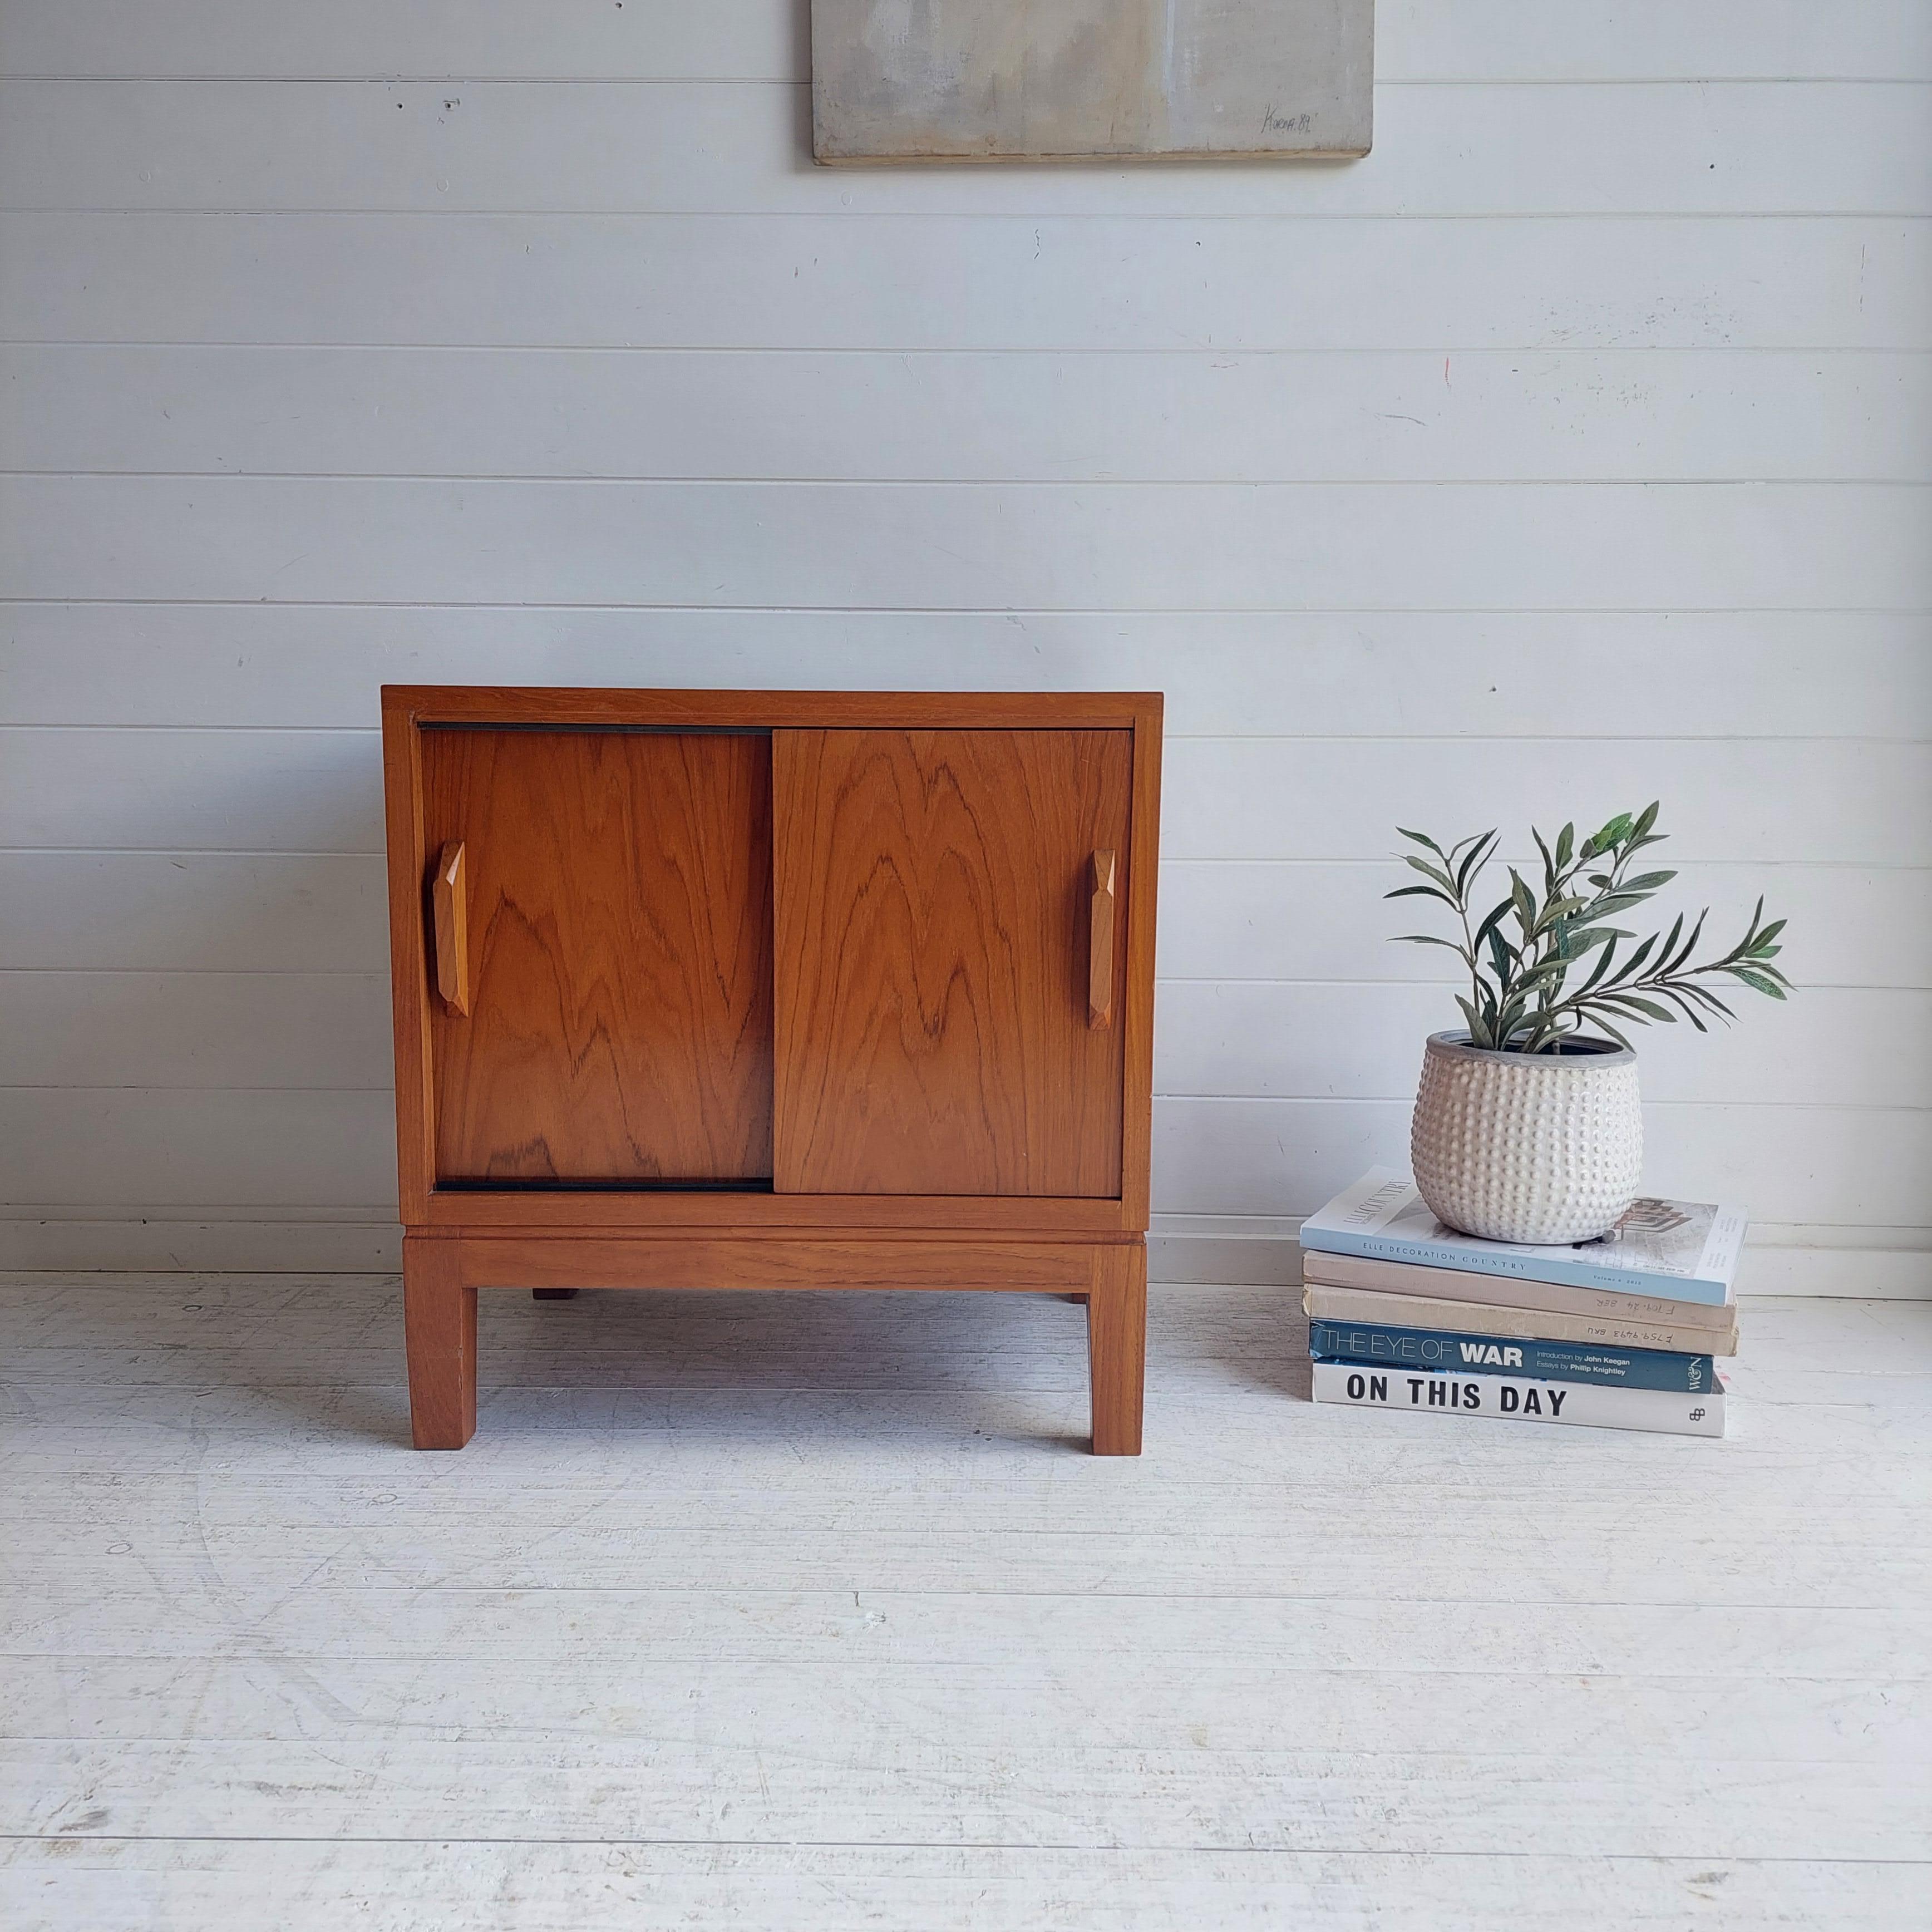 A beautifully designed & crafted, Danish style sliding door media cabinet.
A smart and stylish vintage record cabinet in teak, this dates from the 1970's. 

Featuring minimal clean lines and sliding doors with dividers, making the cabinet ideal for